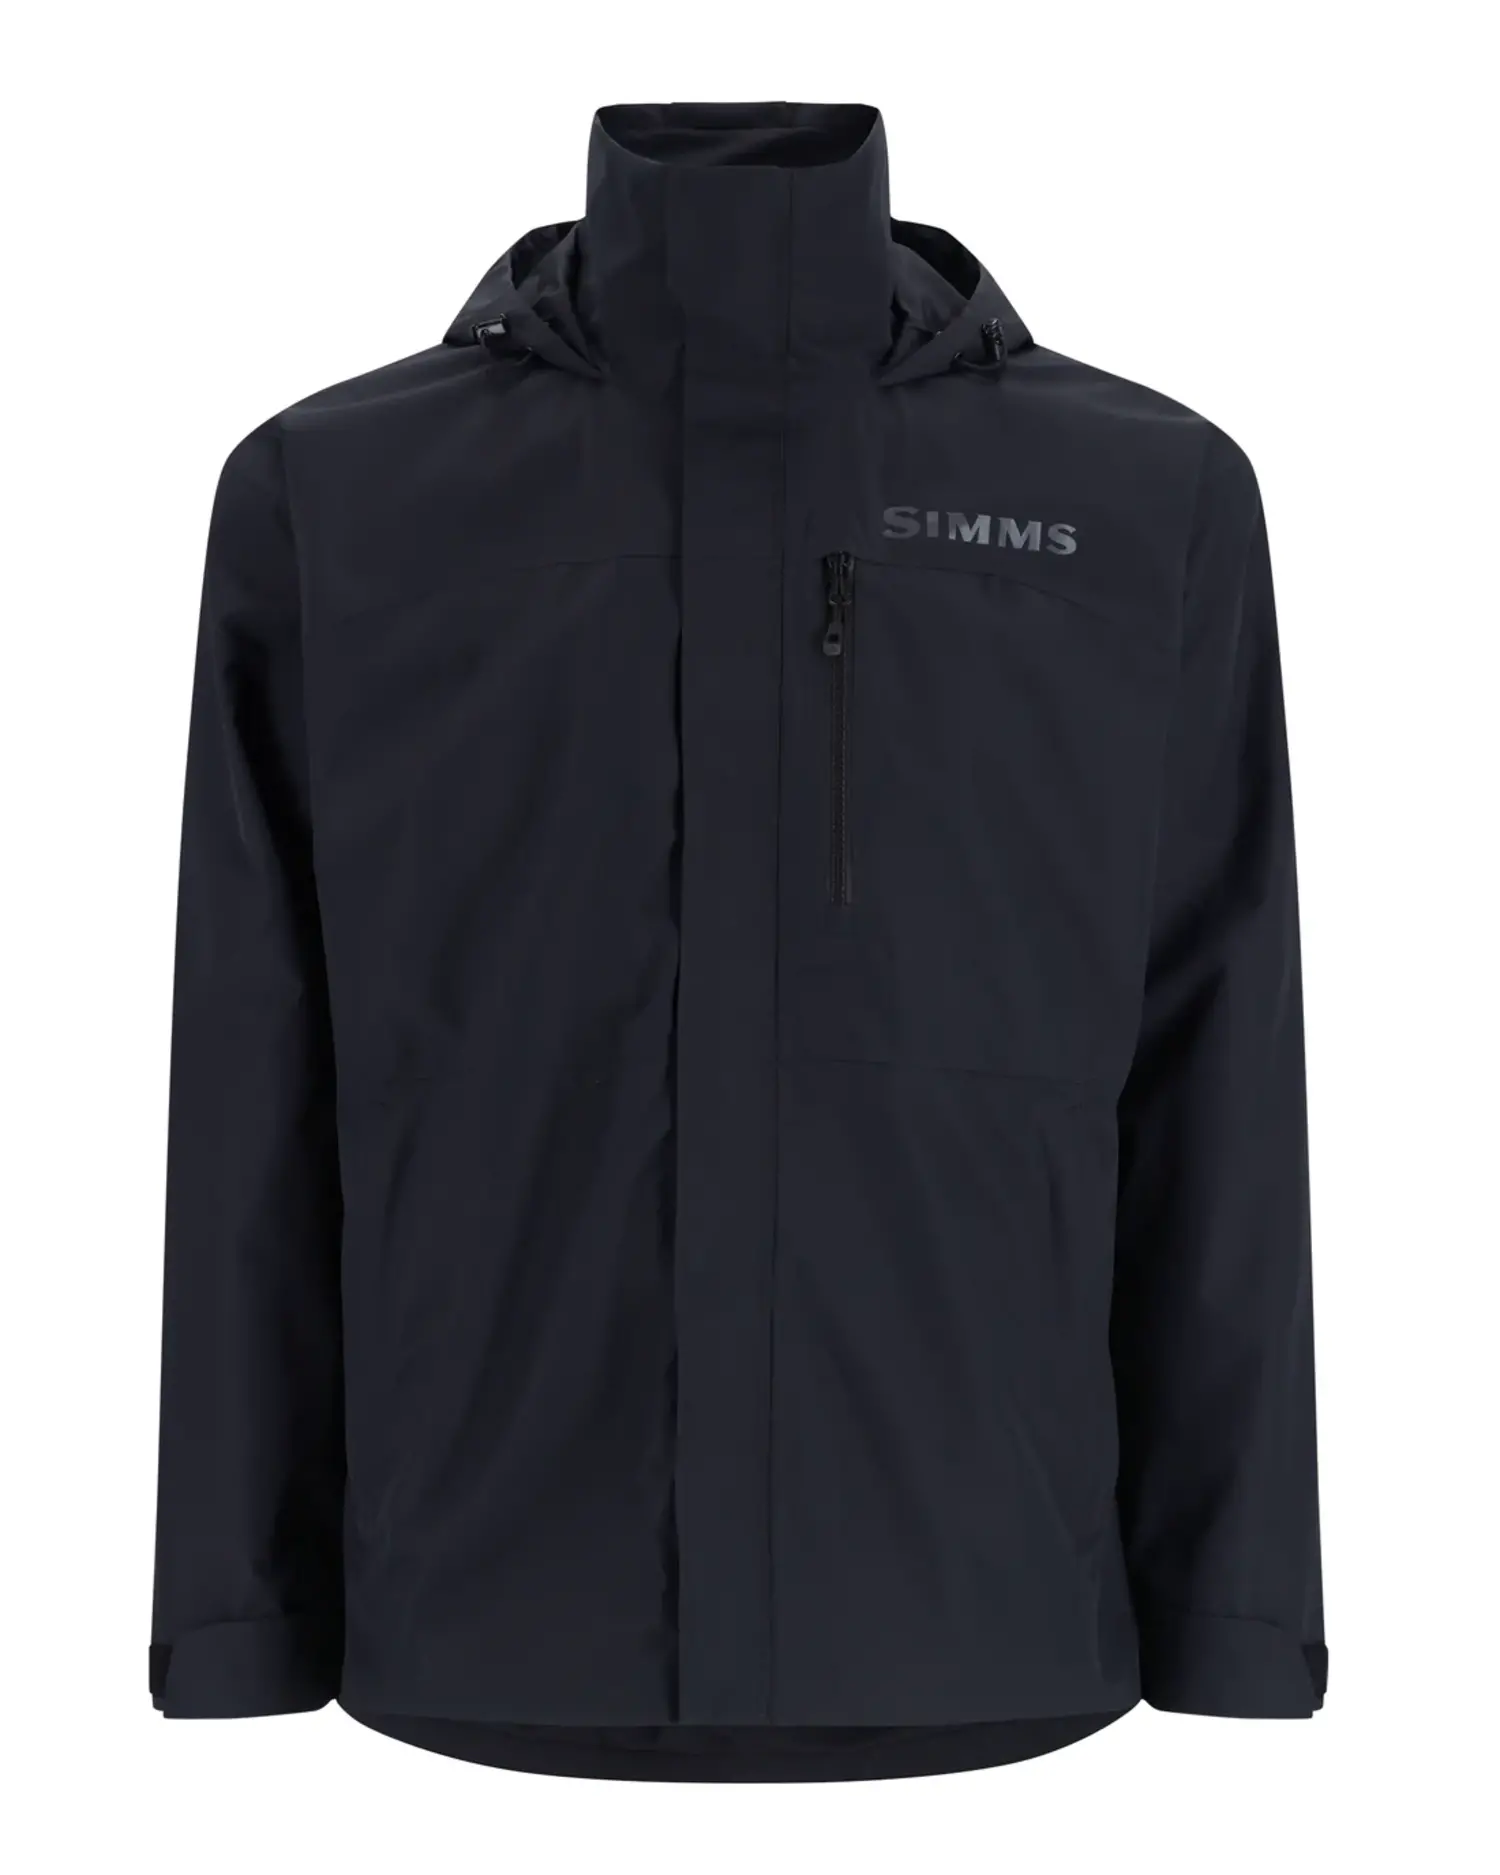 M's Simms Challenger Jacket - The Fish Hawk